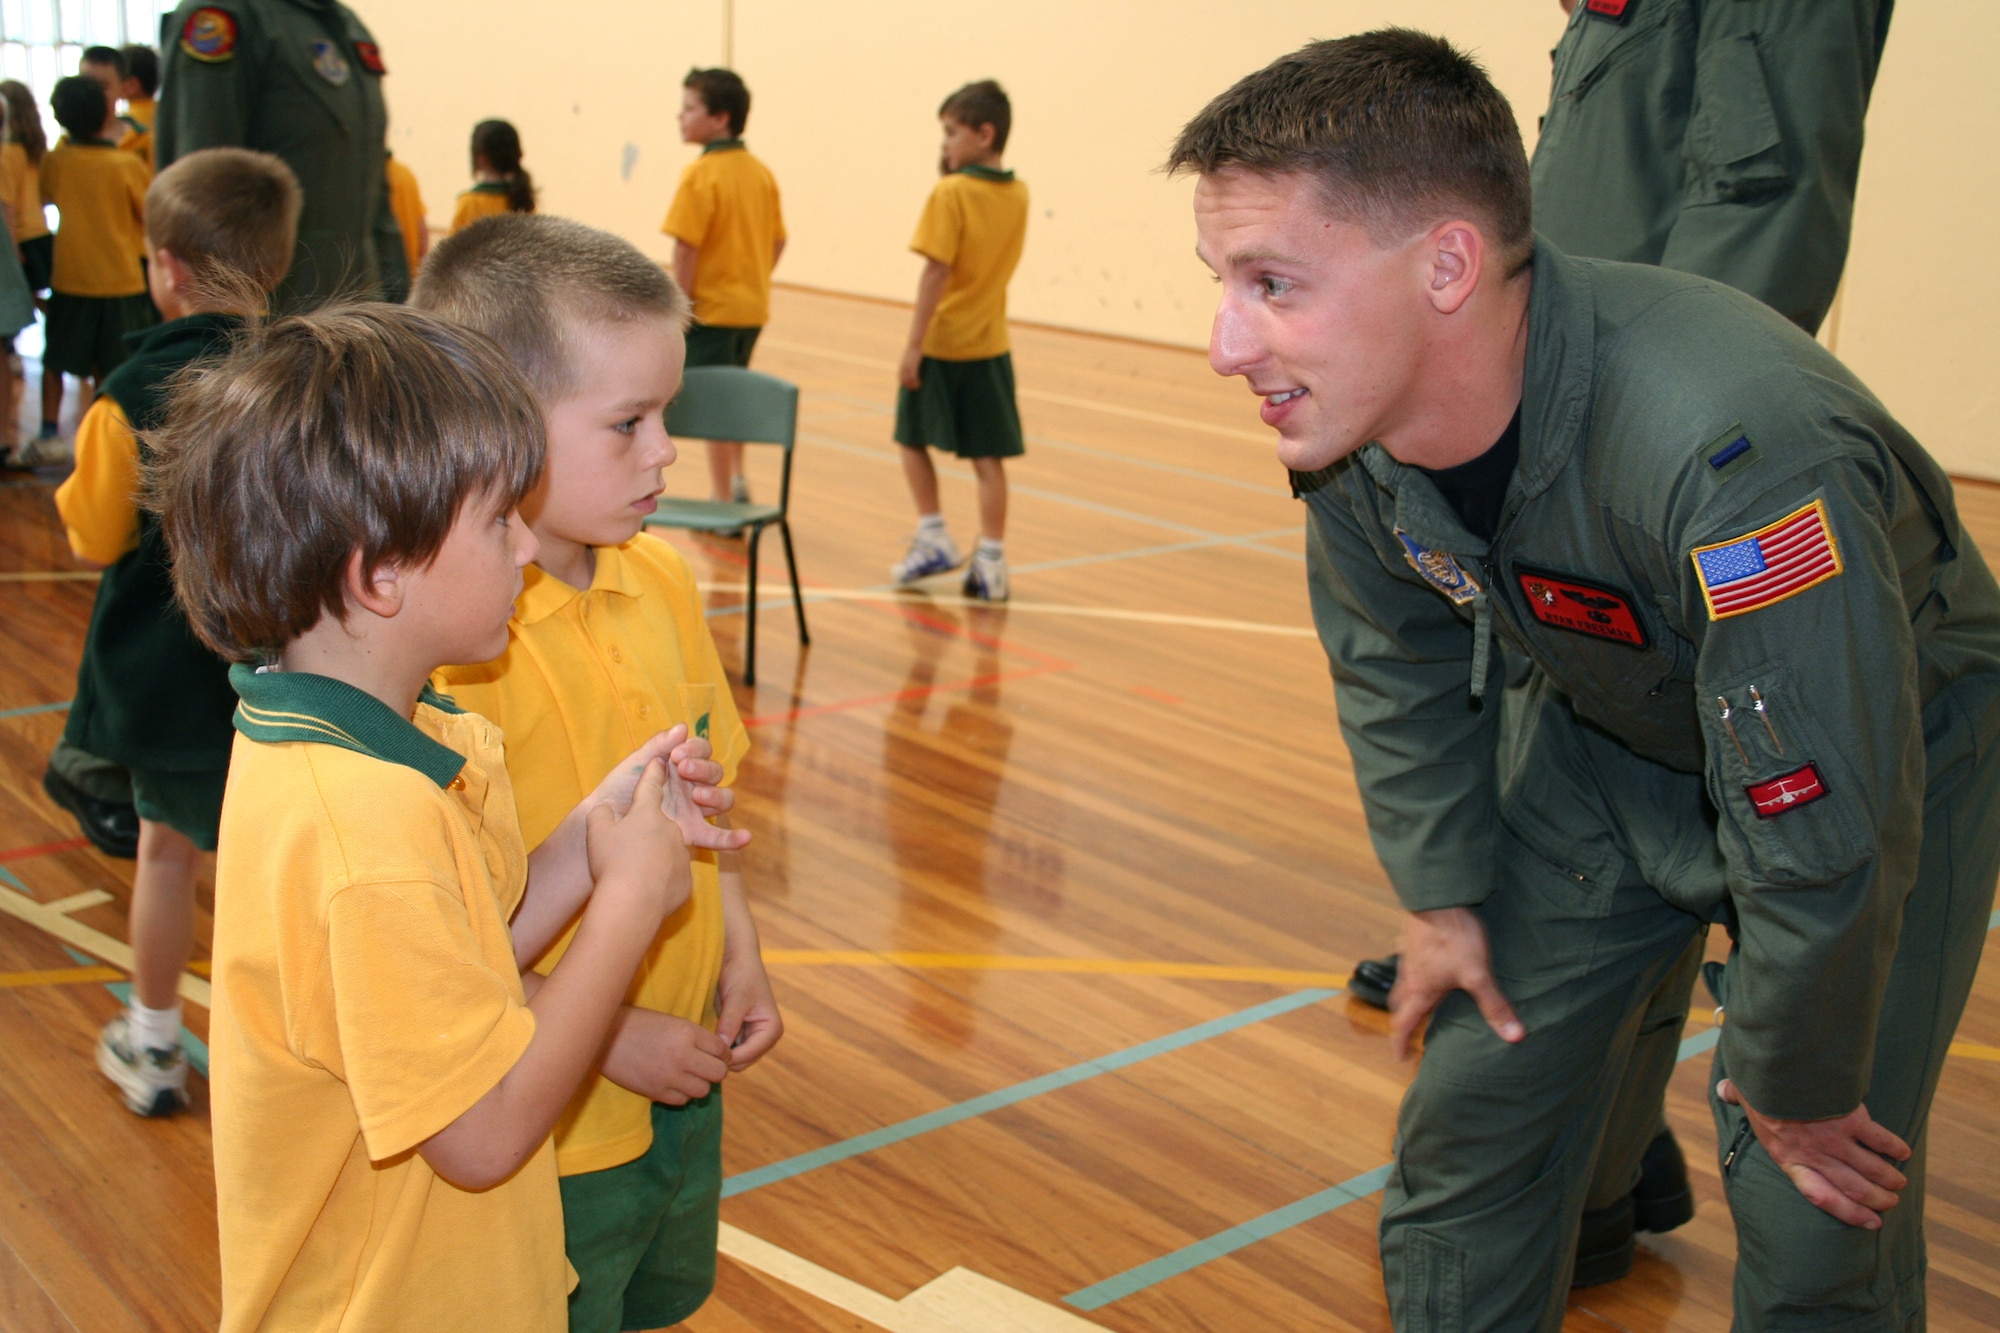 First Lt. Ryan Freeman answers questions about being an Air Force pilot March 22 at the Lara Primary School in Victoria, Australia. Pacific Air Forces Airmen are in Australia supporting the Australian International Airshow 2007. Lieutenant Freeman a pilot with the 535th Airlift Squadron at Hickam Air Force Base, Hawaii. (U.S. Air Force photo/Capt. Yvonne Levardi) 